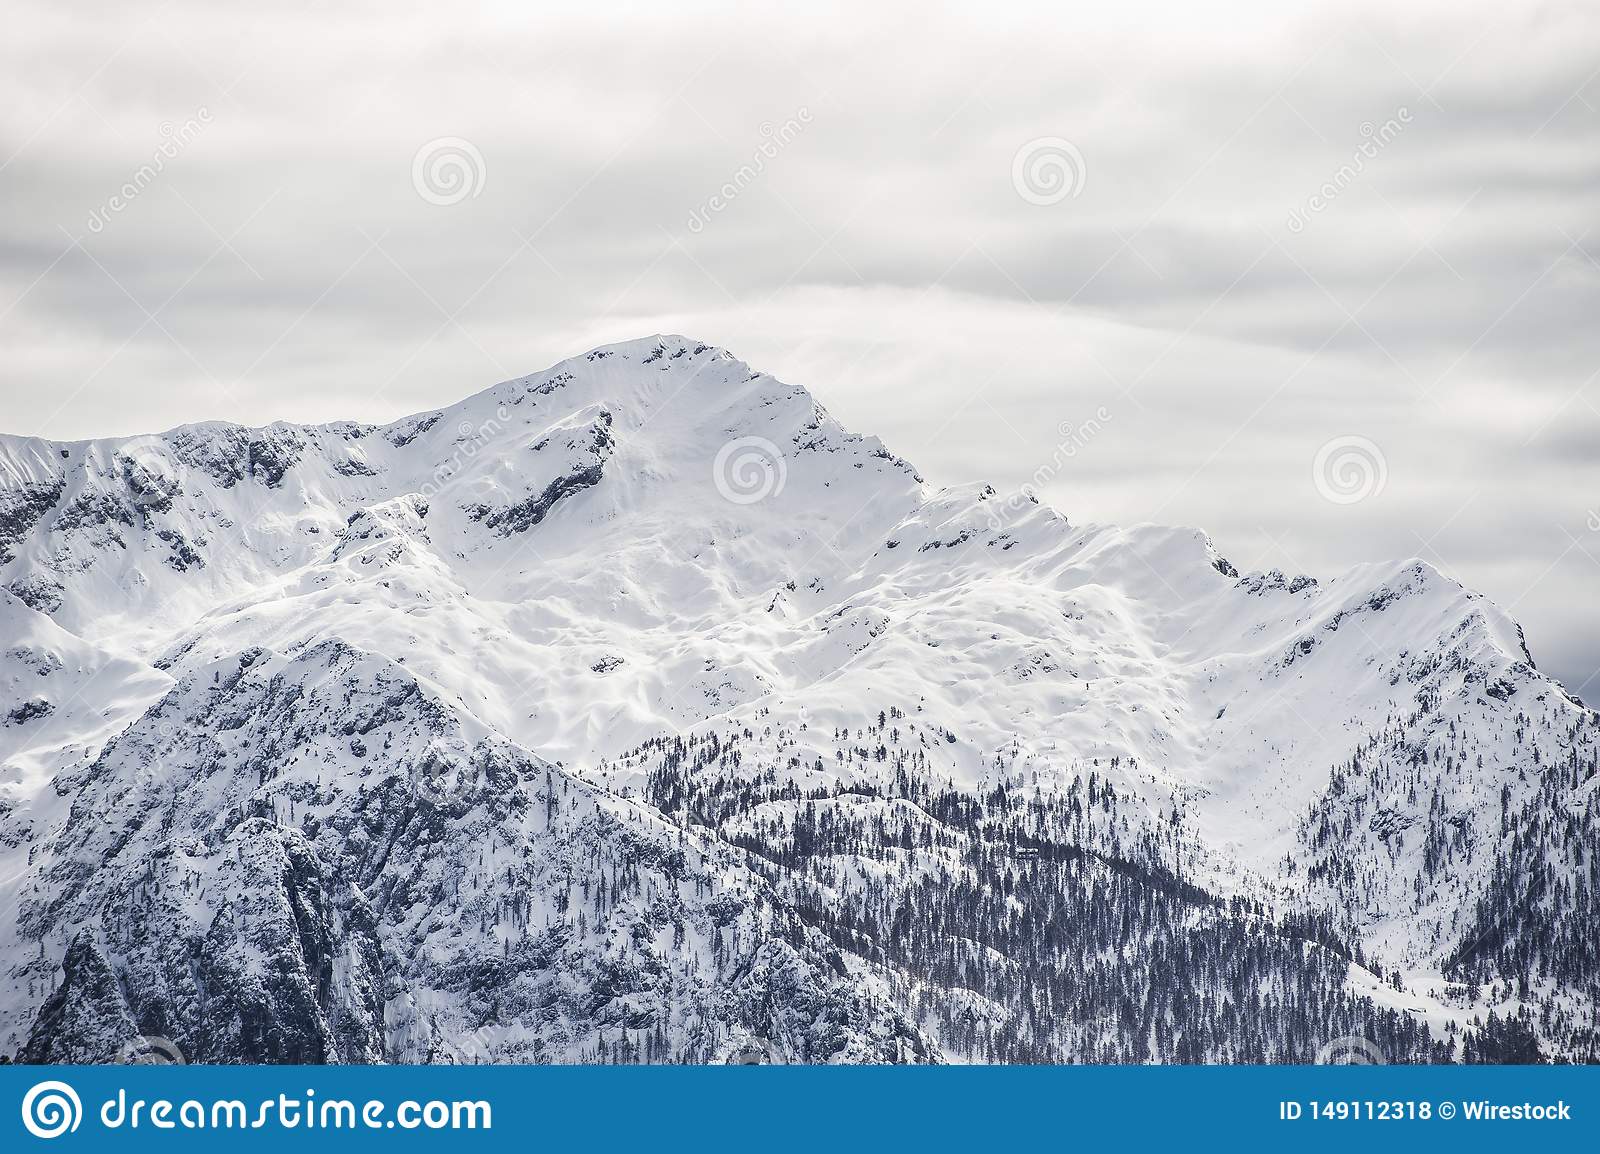 Beautiful scenery of clear white snowy mountains and hills stock photo